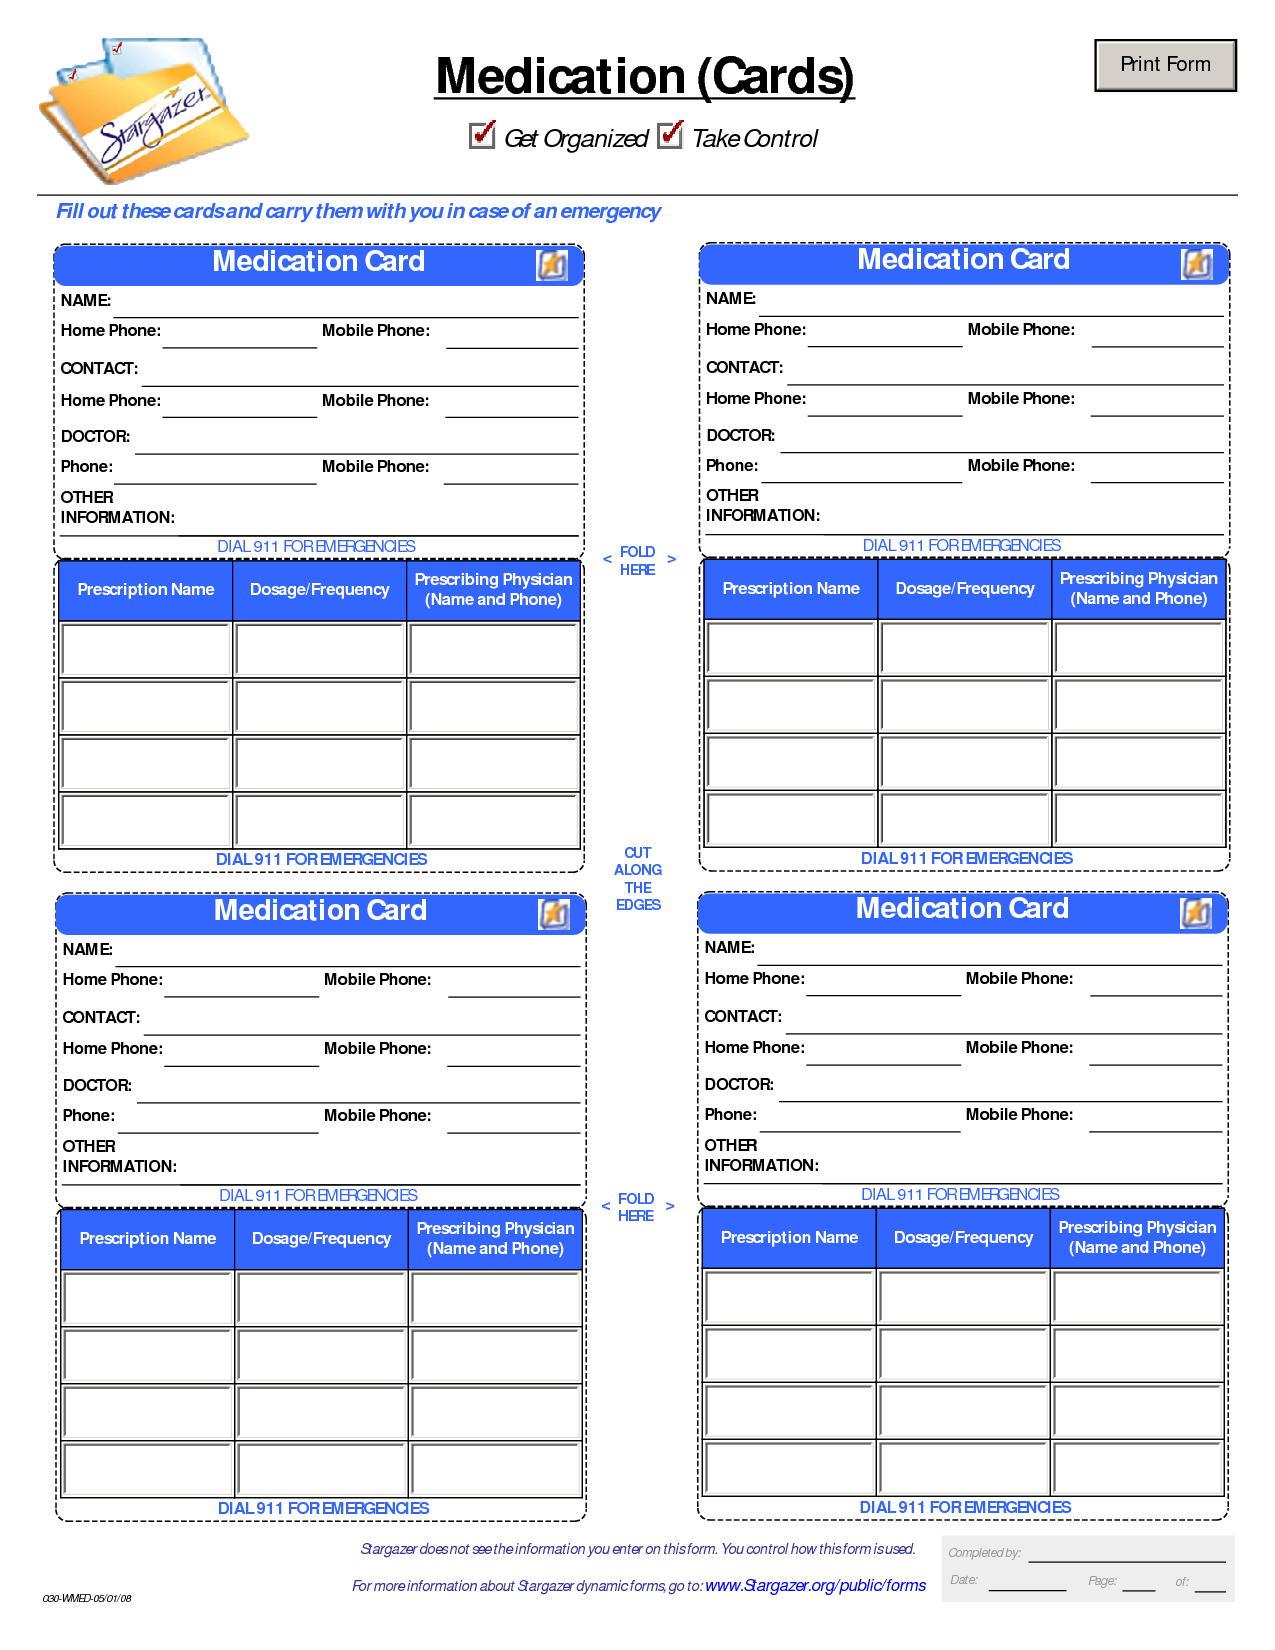 Patient Medication Card Template | Medication List, Medical Inside Med Card Template